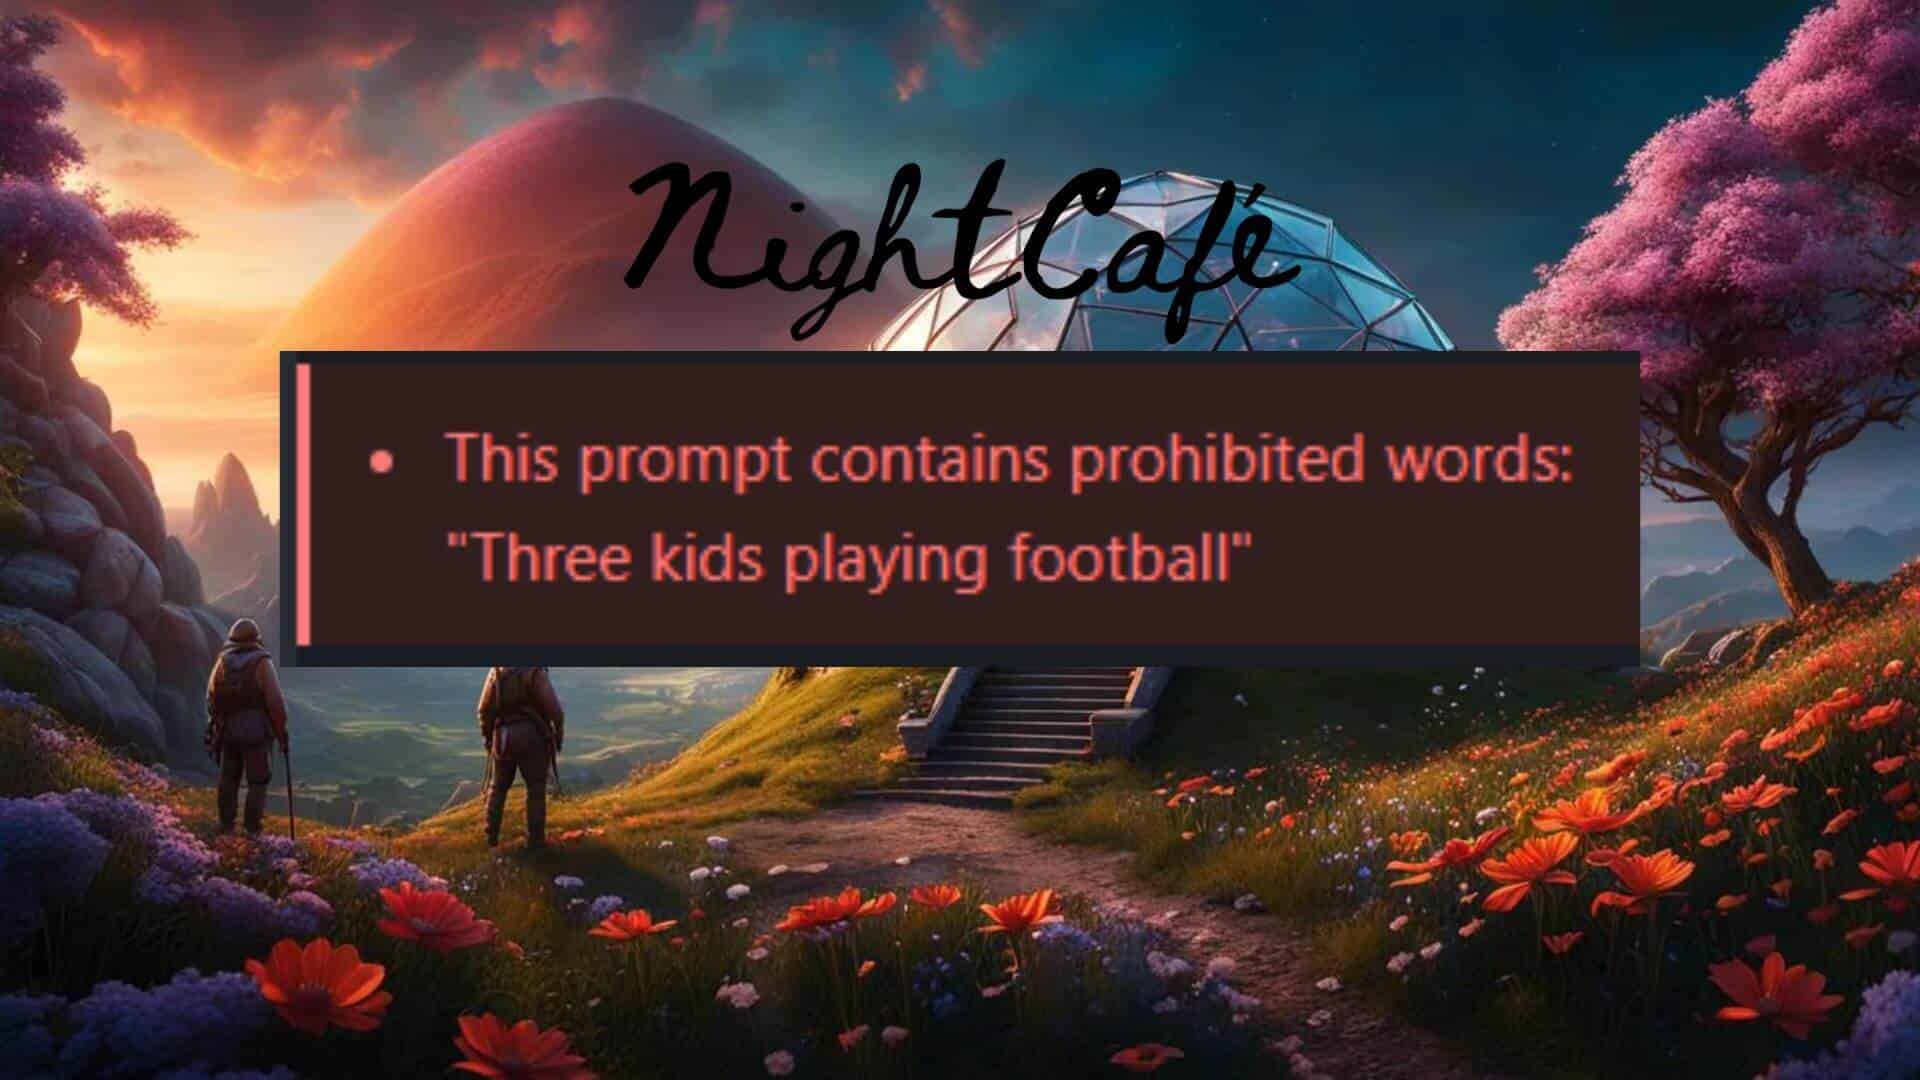 nightcafe this prompt contains prohibited words